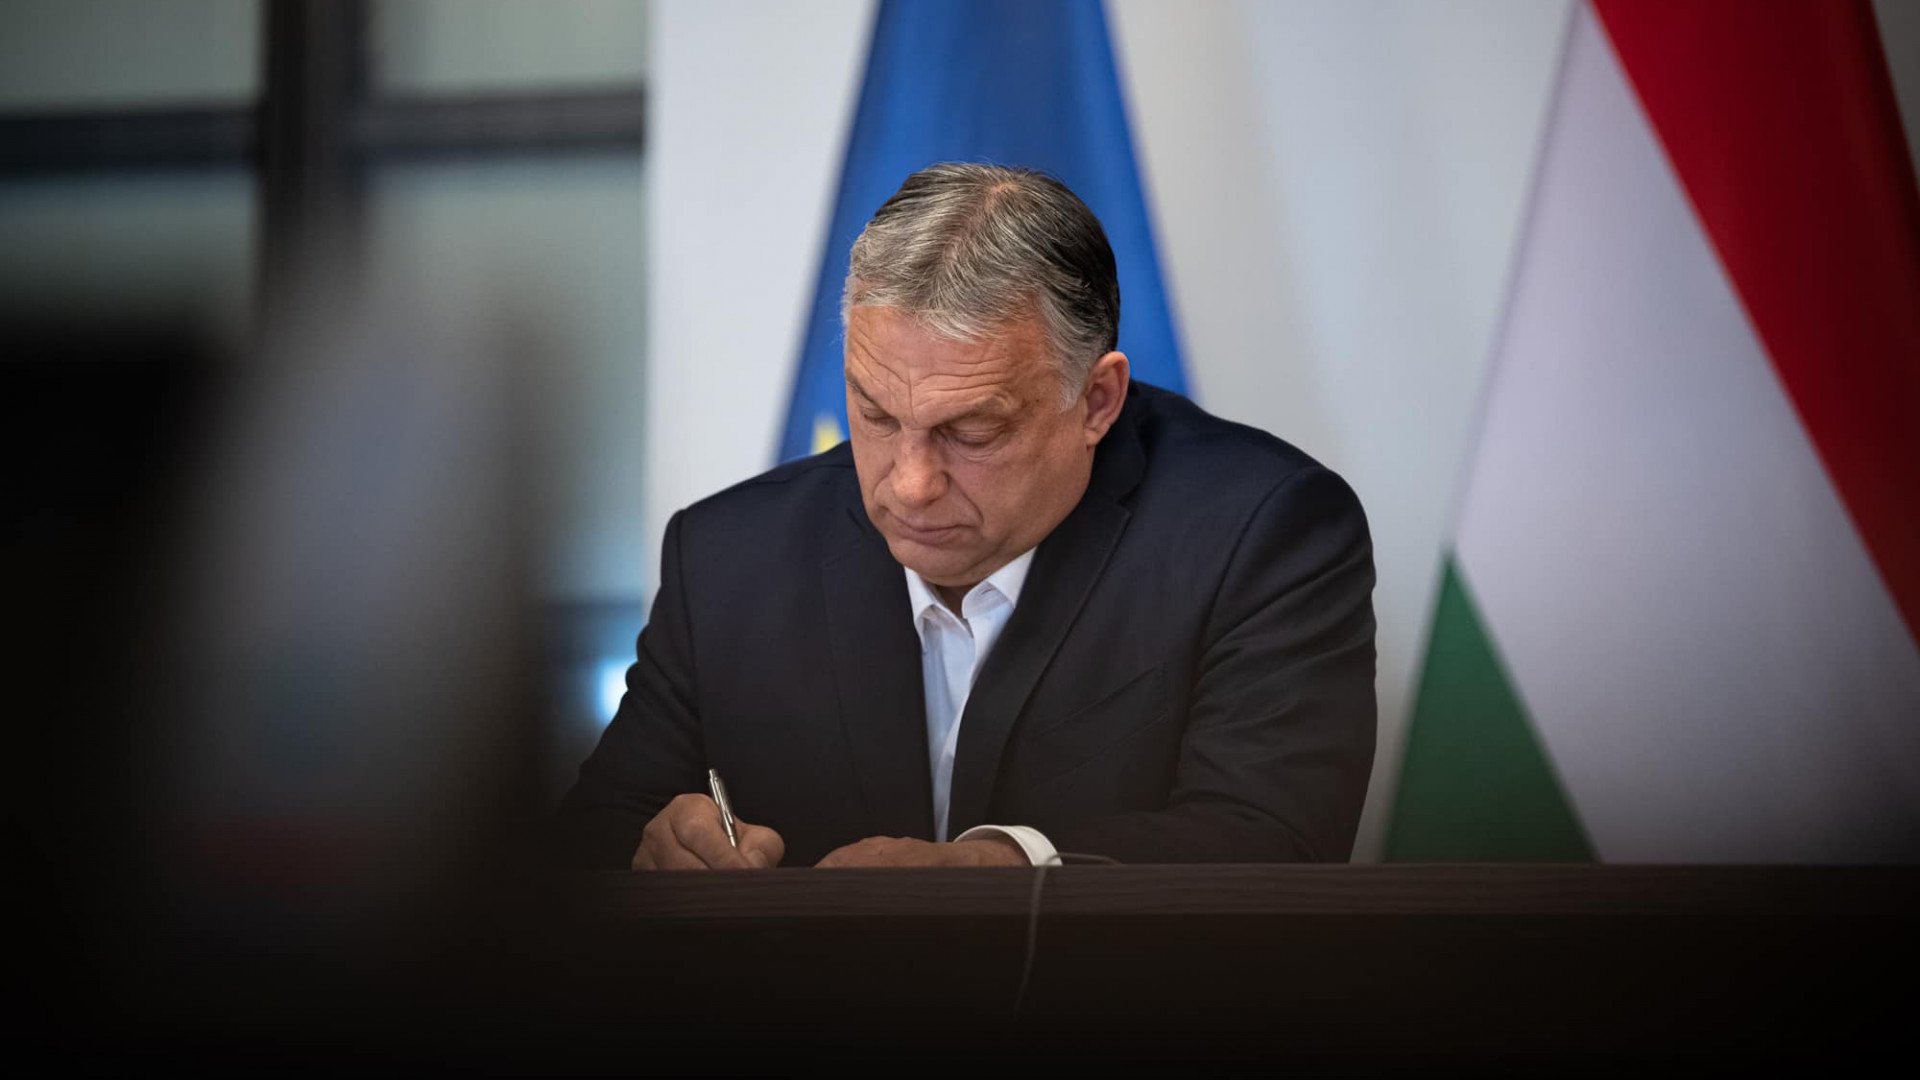 Conservative Win in Greece Puts a Smile on Hungarian Government's Face